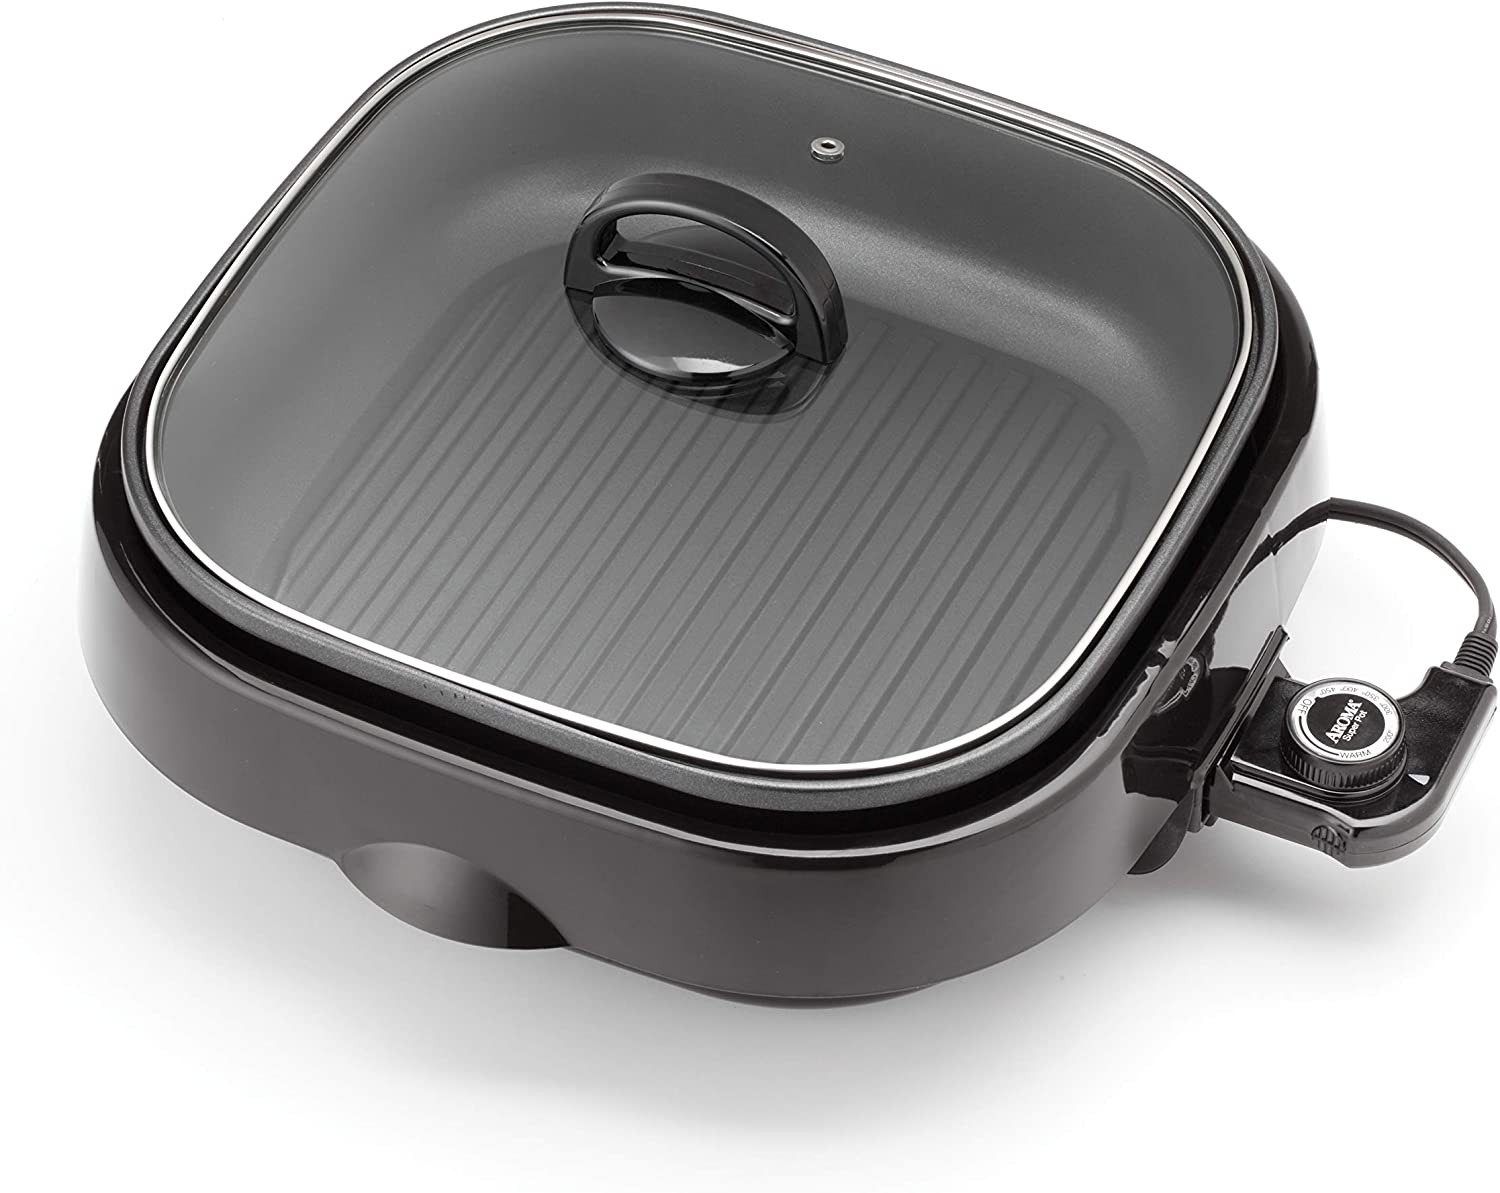 Aroma Housewares ASP-218B Grillet 4Qt. 3-in-1 Cool-Touch Electric Indoor Grill Portable, Dishwasher Safe, with Nonstick Pan &